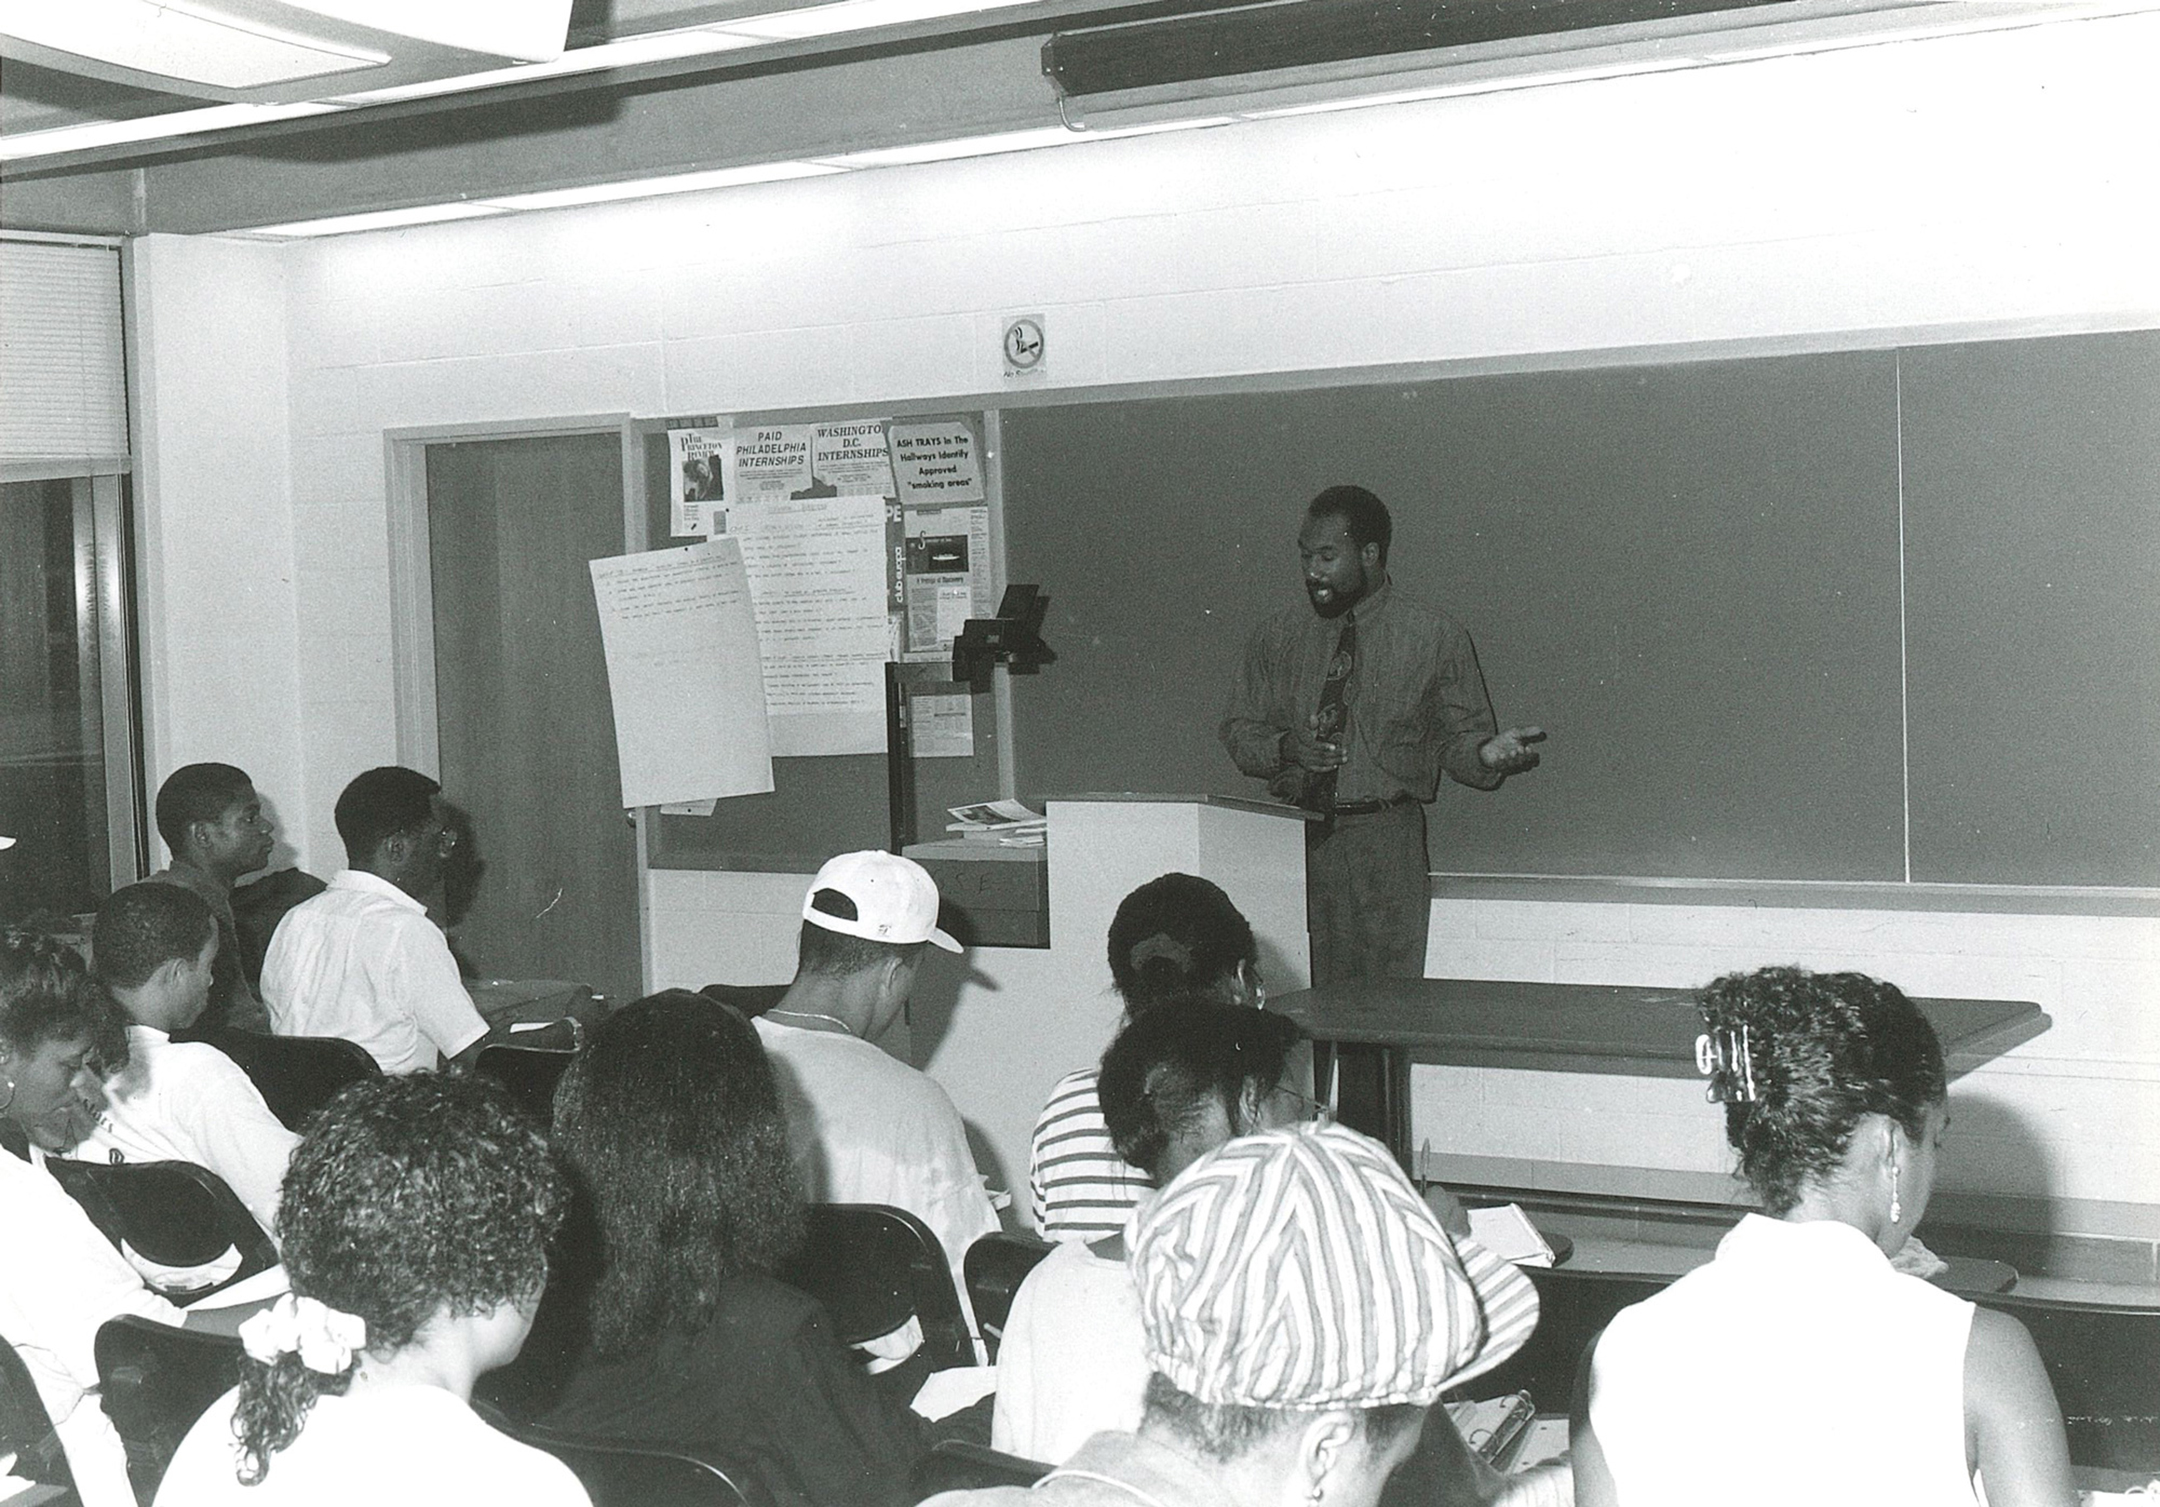 Black and white photo of Herman Beavers teaching at the front of a classroom